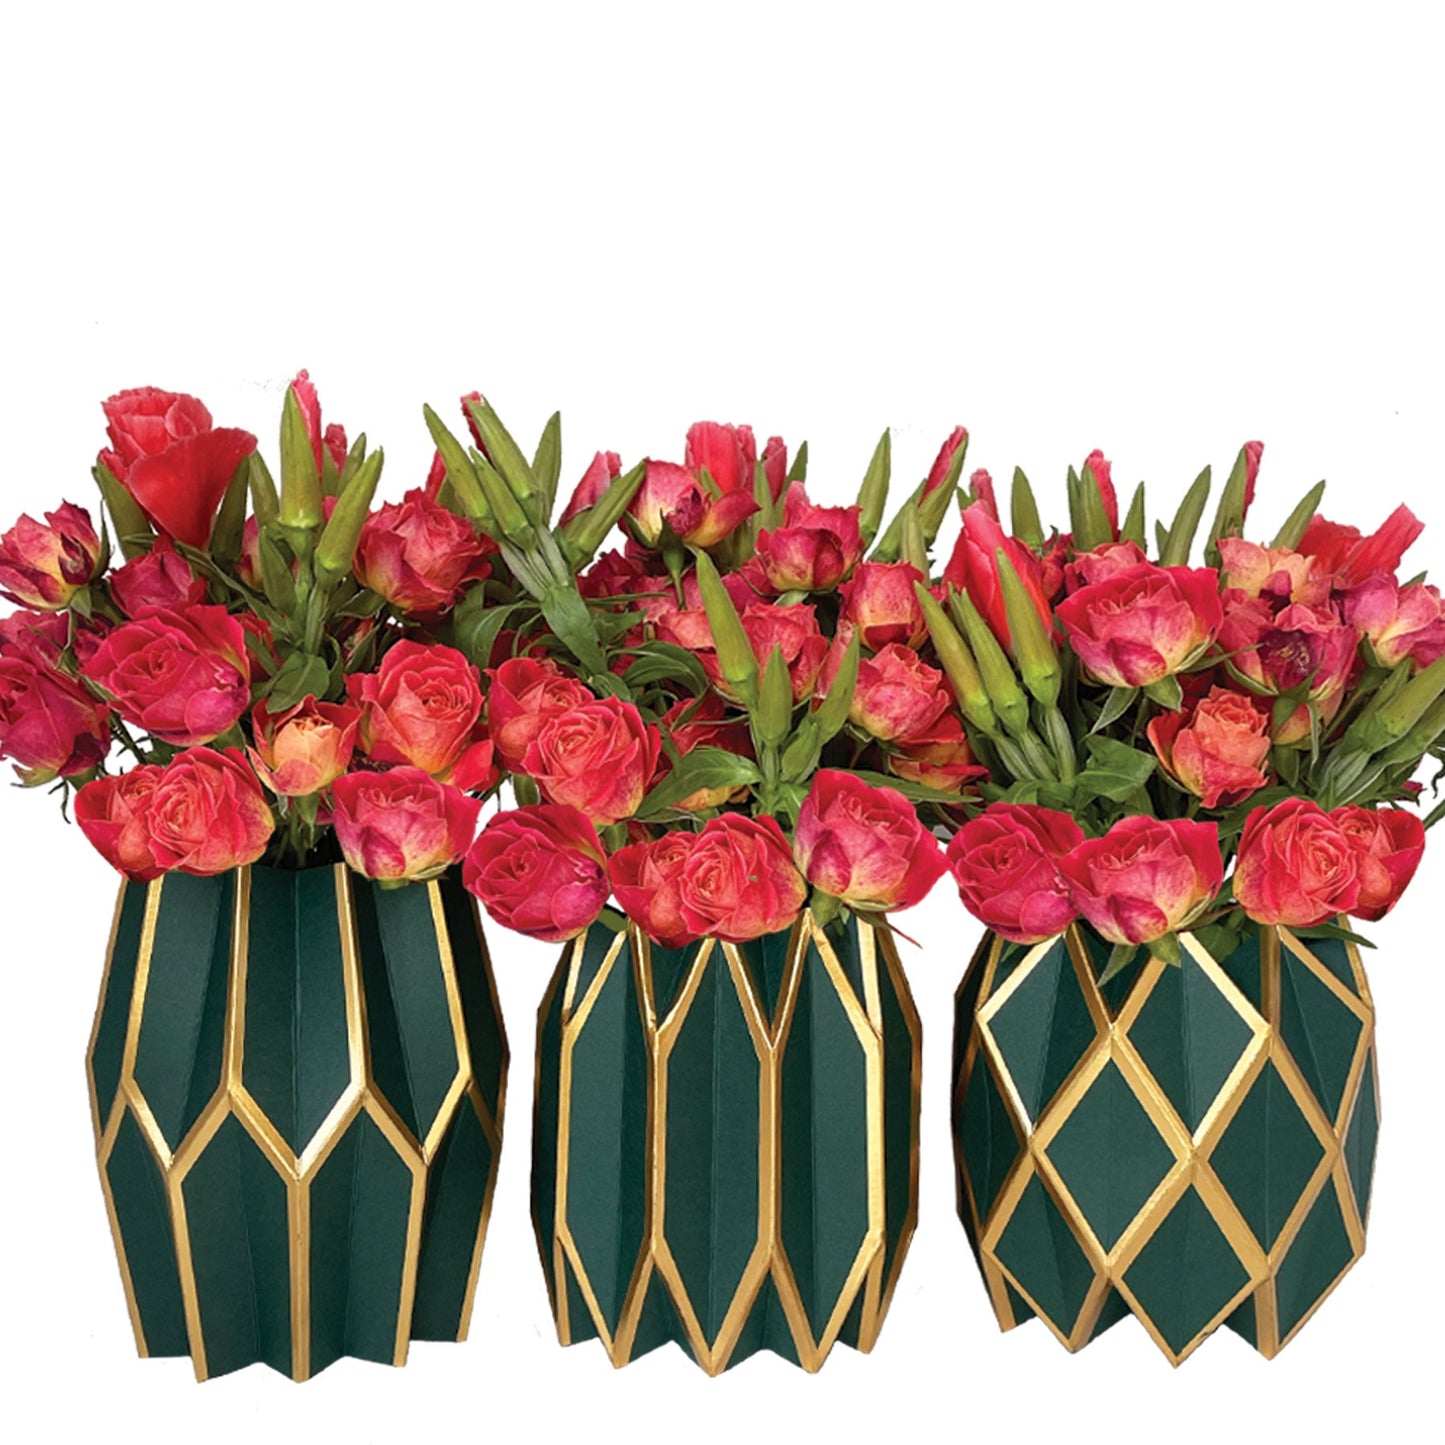 Dark green paper vases with red flowers